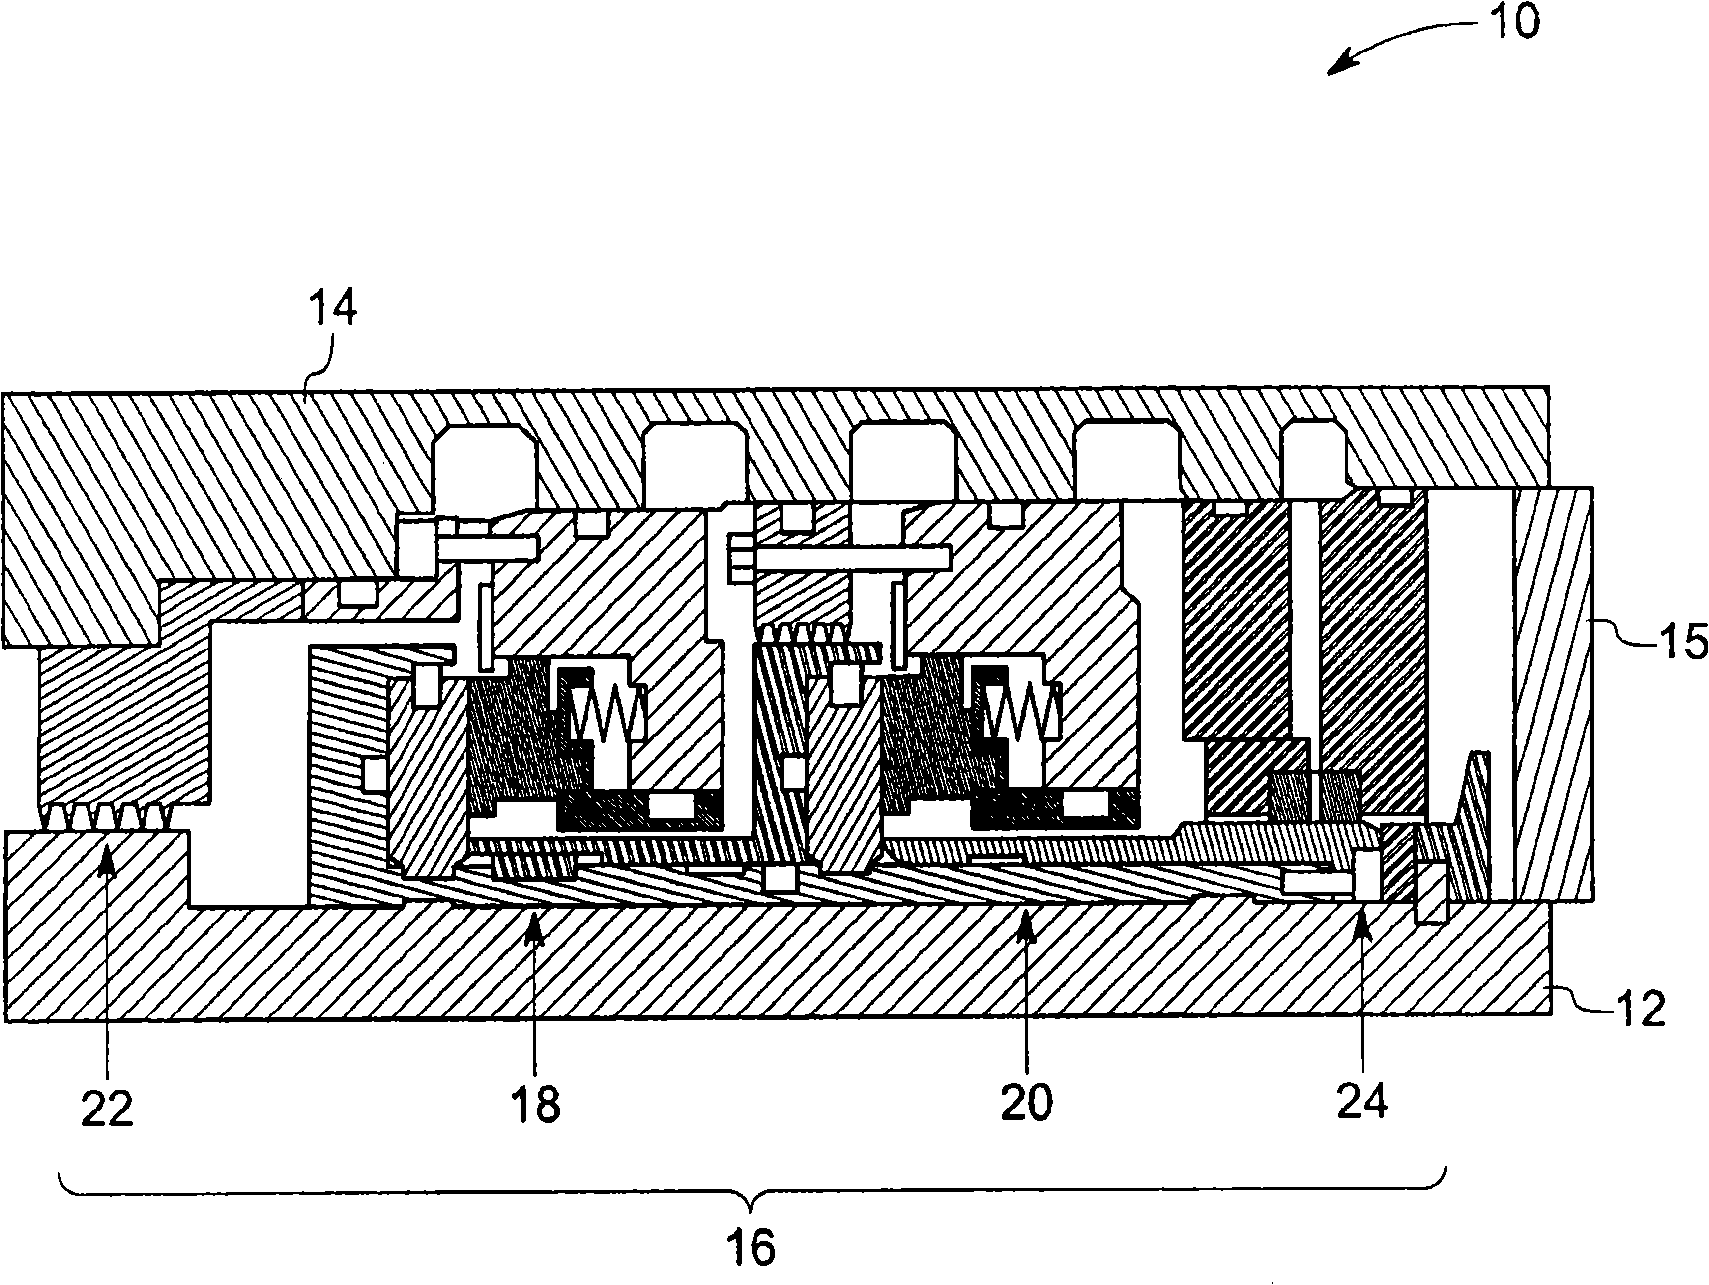 Barrier sealing system for centrifugal compressors